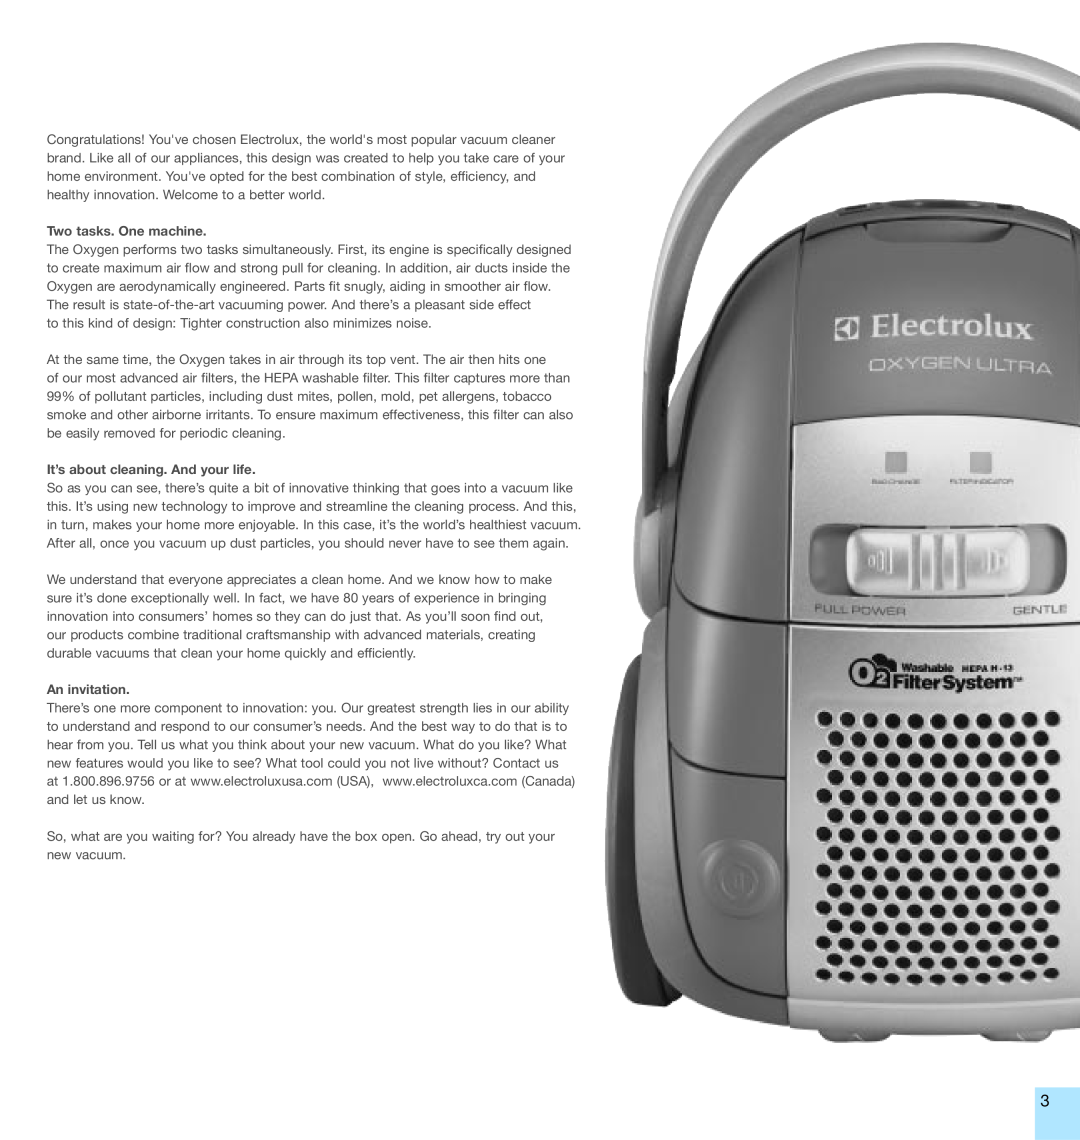 Electrolux EL6989A, EL6988A manual Two tasks. One machine, It’s about cleaning. And your life, An invitation 